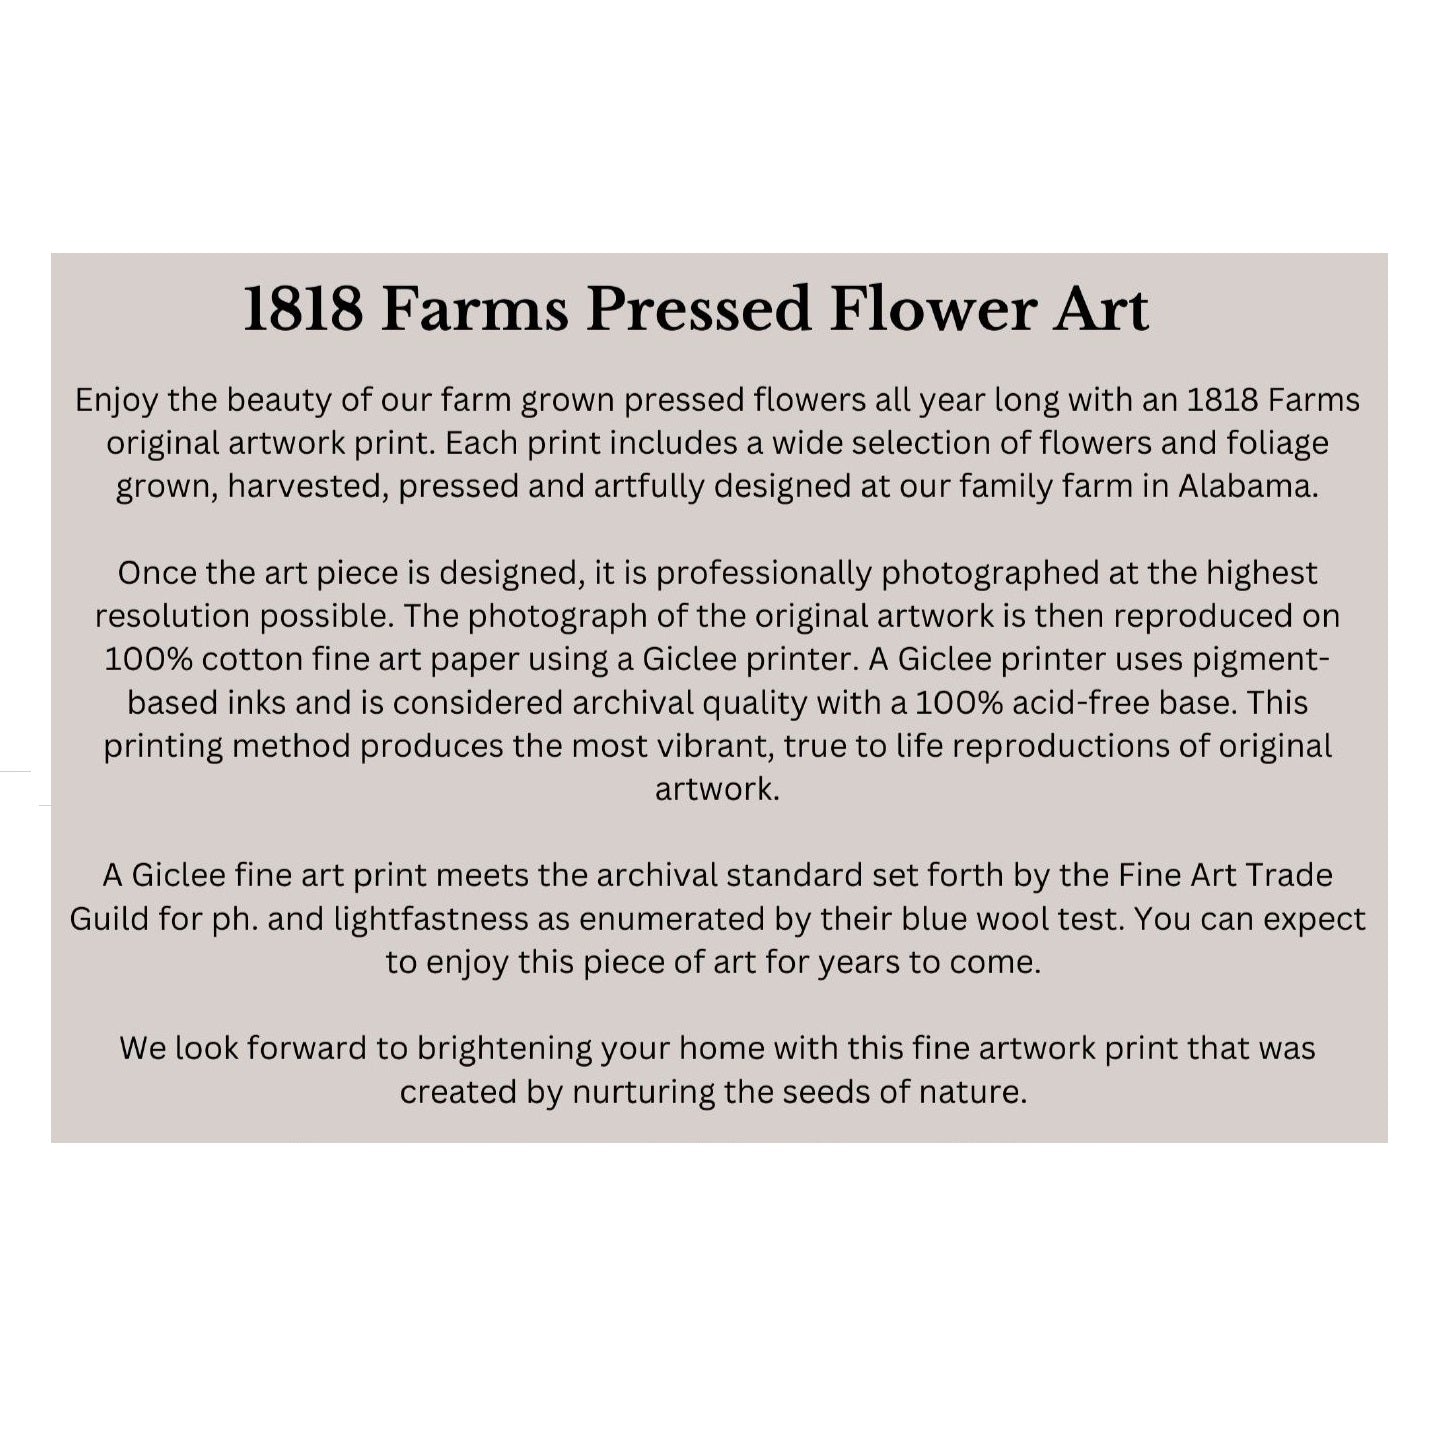 Tennessee Themed Giclée Print Featuring Dried, Pressed Flowers - "Where I Bloom" Collection Giclee Art Print 1818 Farms   